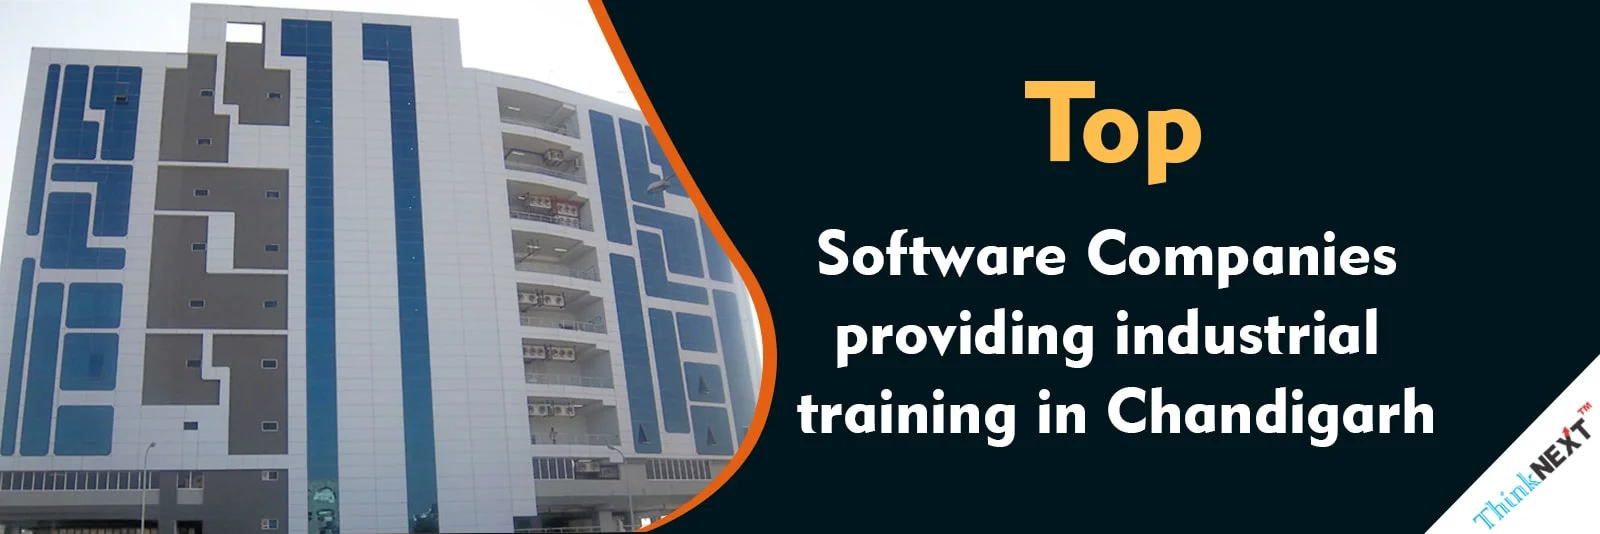 Top Software Companies providing Industrial in Chandigarh Mohali